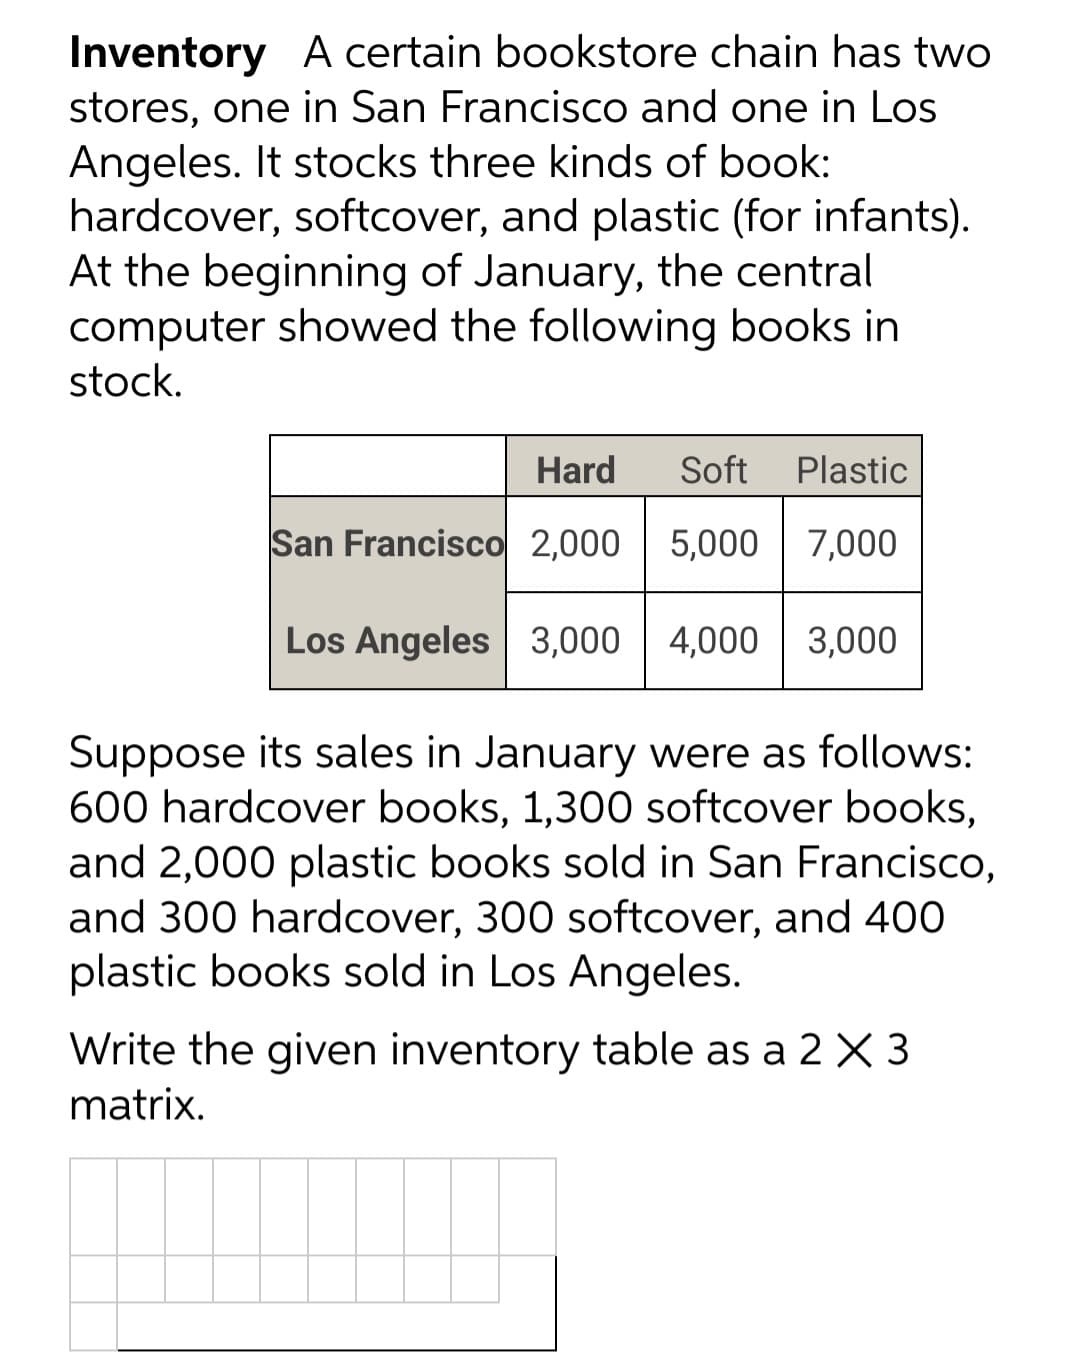 Inventory A certain bookstore chain has two
stores, one in San Francisco and one in Los
Angeles. It stocks three kinds of book:
hardcover, softcover, and plastic (for infants).
At the beginning of January, the central
computer showed the following books in
stock.
Hard Soft Plastic
San Francisco 2,000 5,000 7,000
Los Angeles 3,000 4,000 3,000
Suppose its sales in January were as follows:
600 hardcover books, 1,300 softcover books,
and 2,000 plastic books sold in San Francisco,
and 300 hardcover, 300 softcover, and 400
plastic books sold in Los Angeles.
Write the given inventory table as a 2 X 3
matrix.